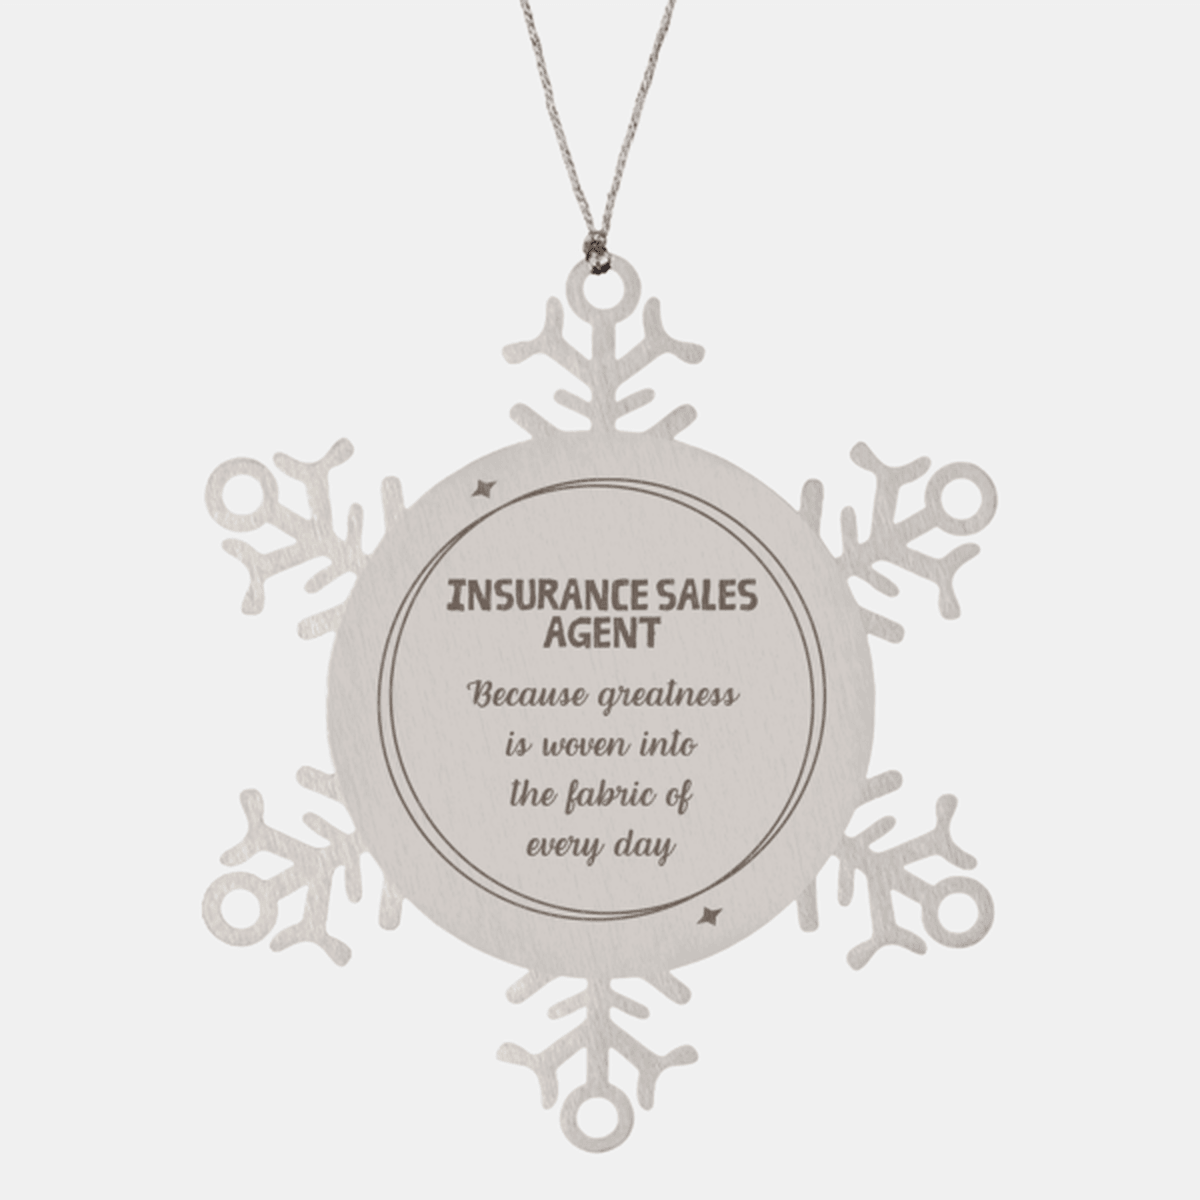 Sarcastic Insurance Sales Agent Snowflake Ornament Gifts, Christmas Holiday Gifts for Insurance Sales Agent Ornament, Insurance Sales Agent: Because greatness is woven into the fabric of every day, Coworkers, Friends - Mallard Moon Gift Shop